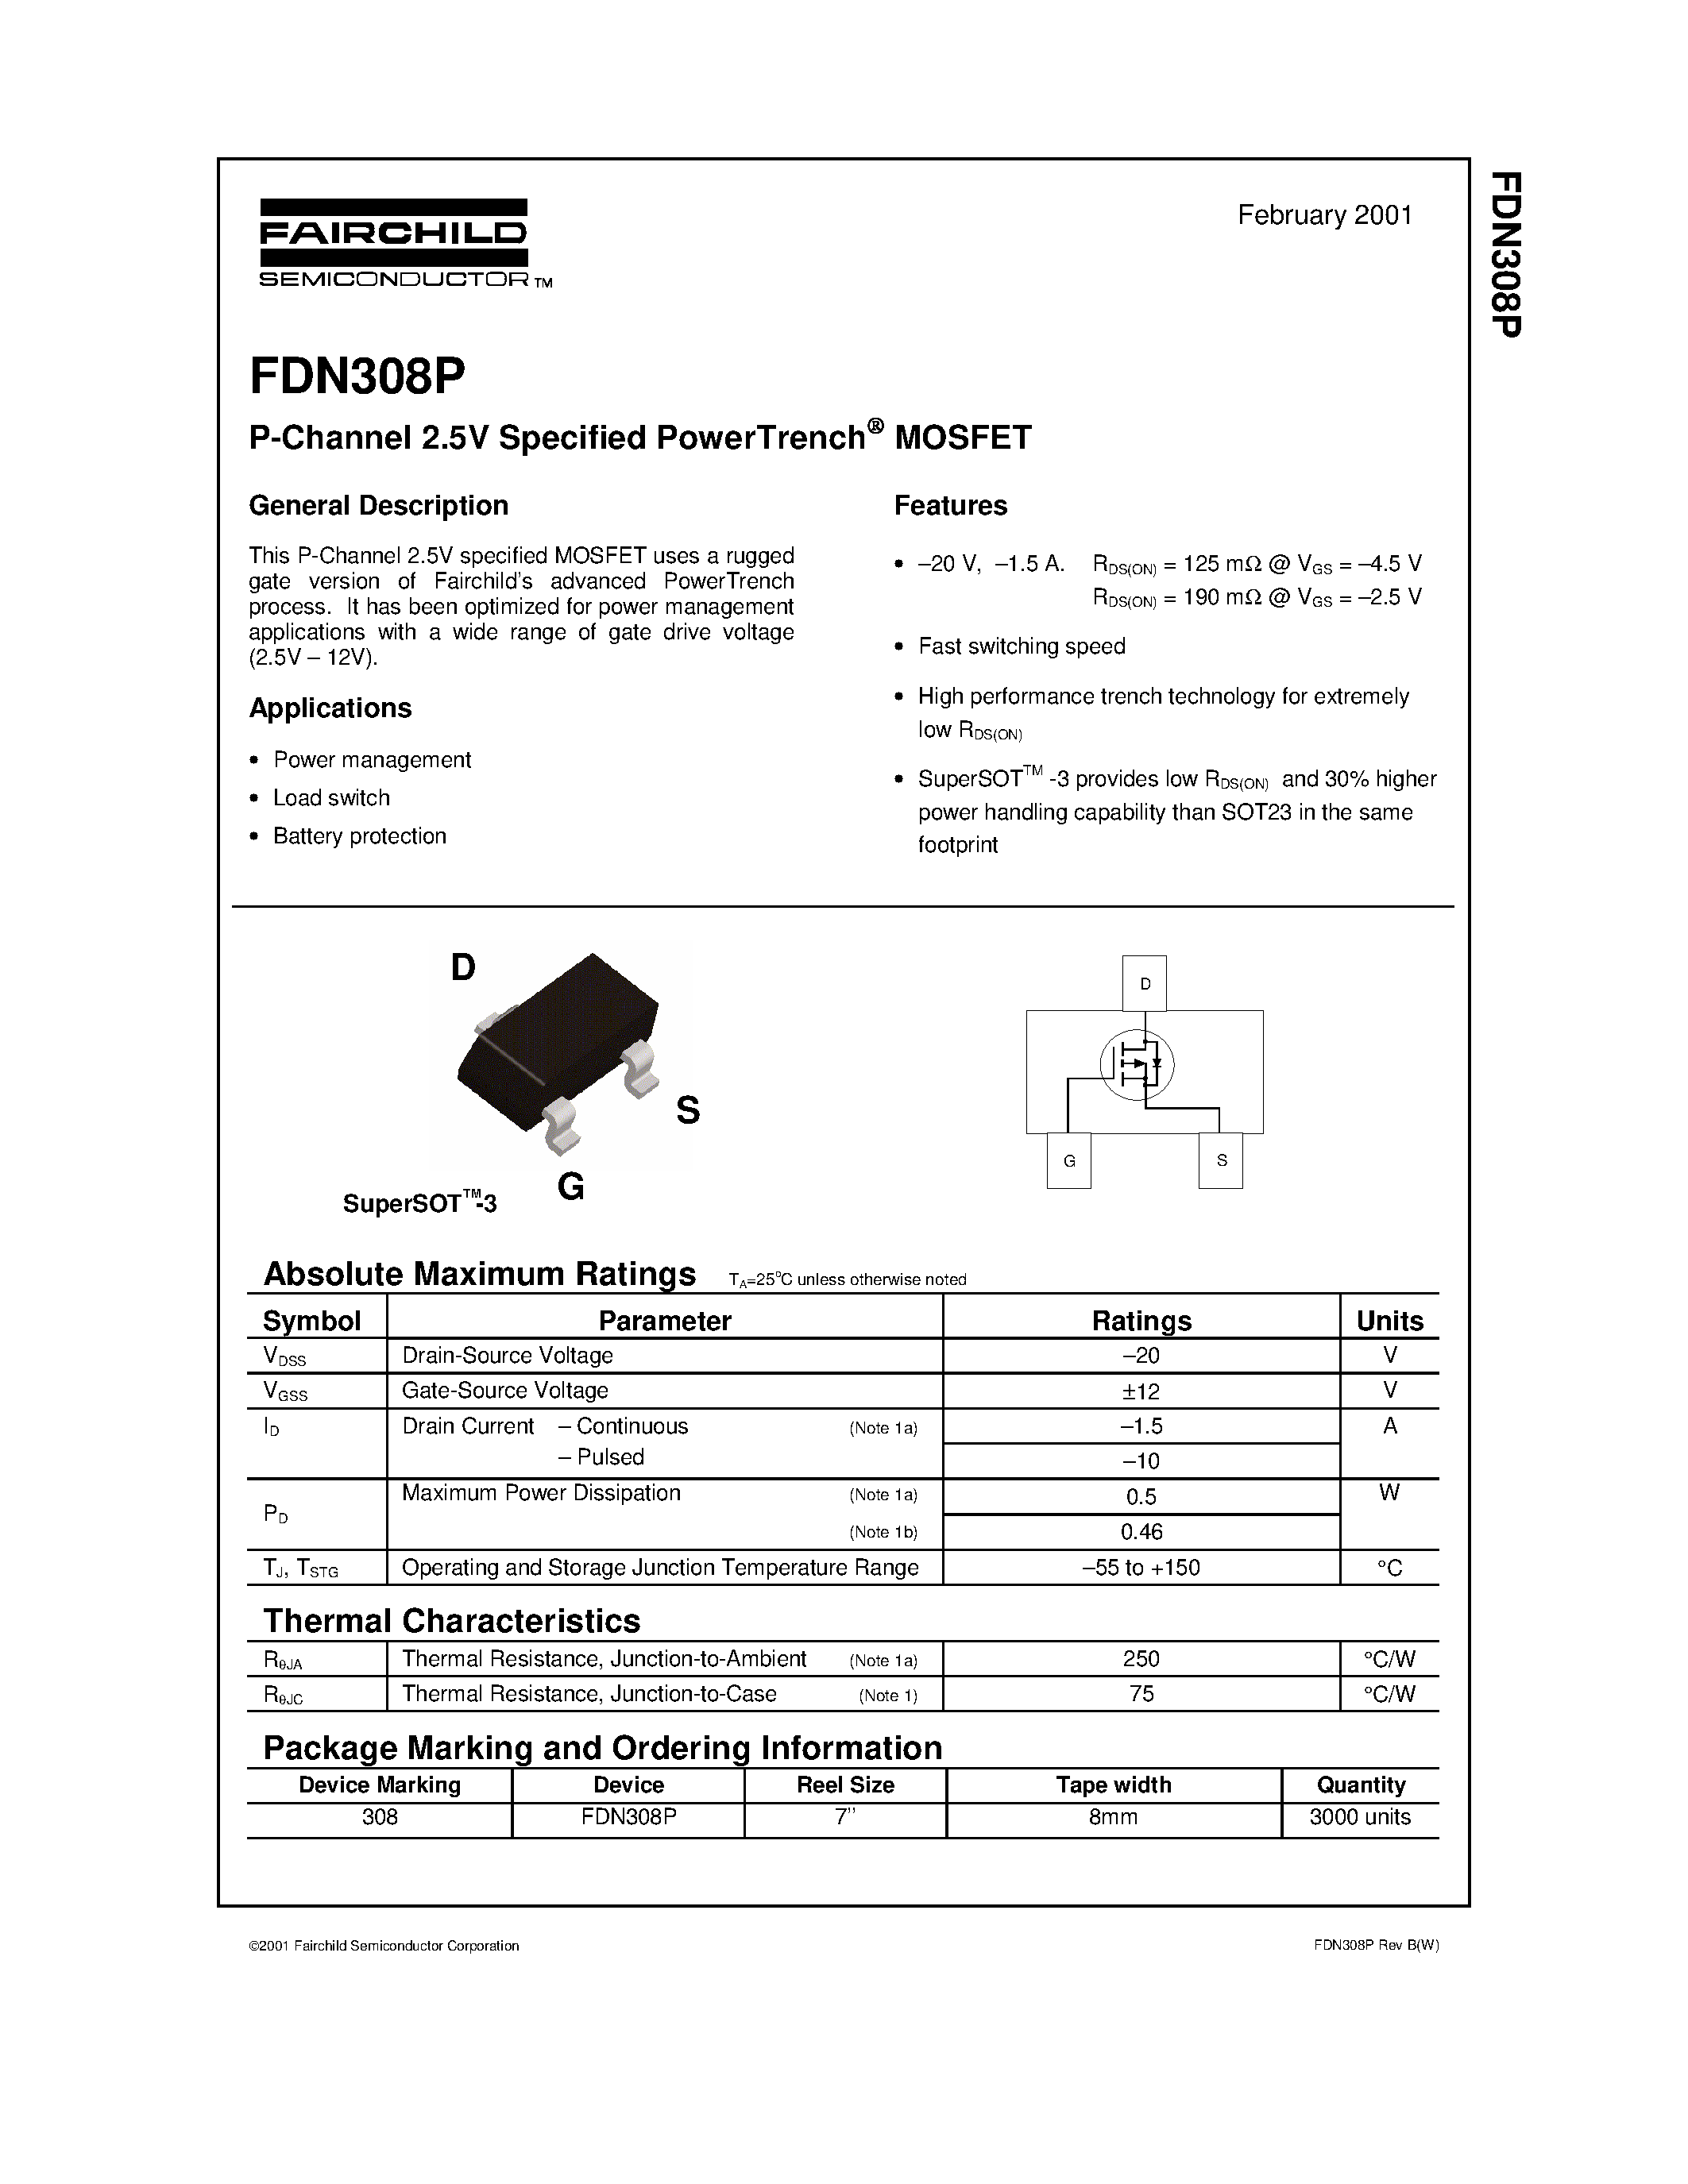 Даташит FDN308P - P-Channel 2.5V Specified PowerTrench MOSFET страница 1